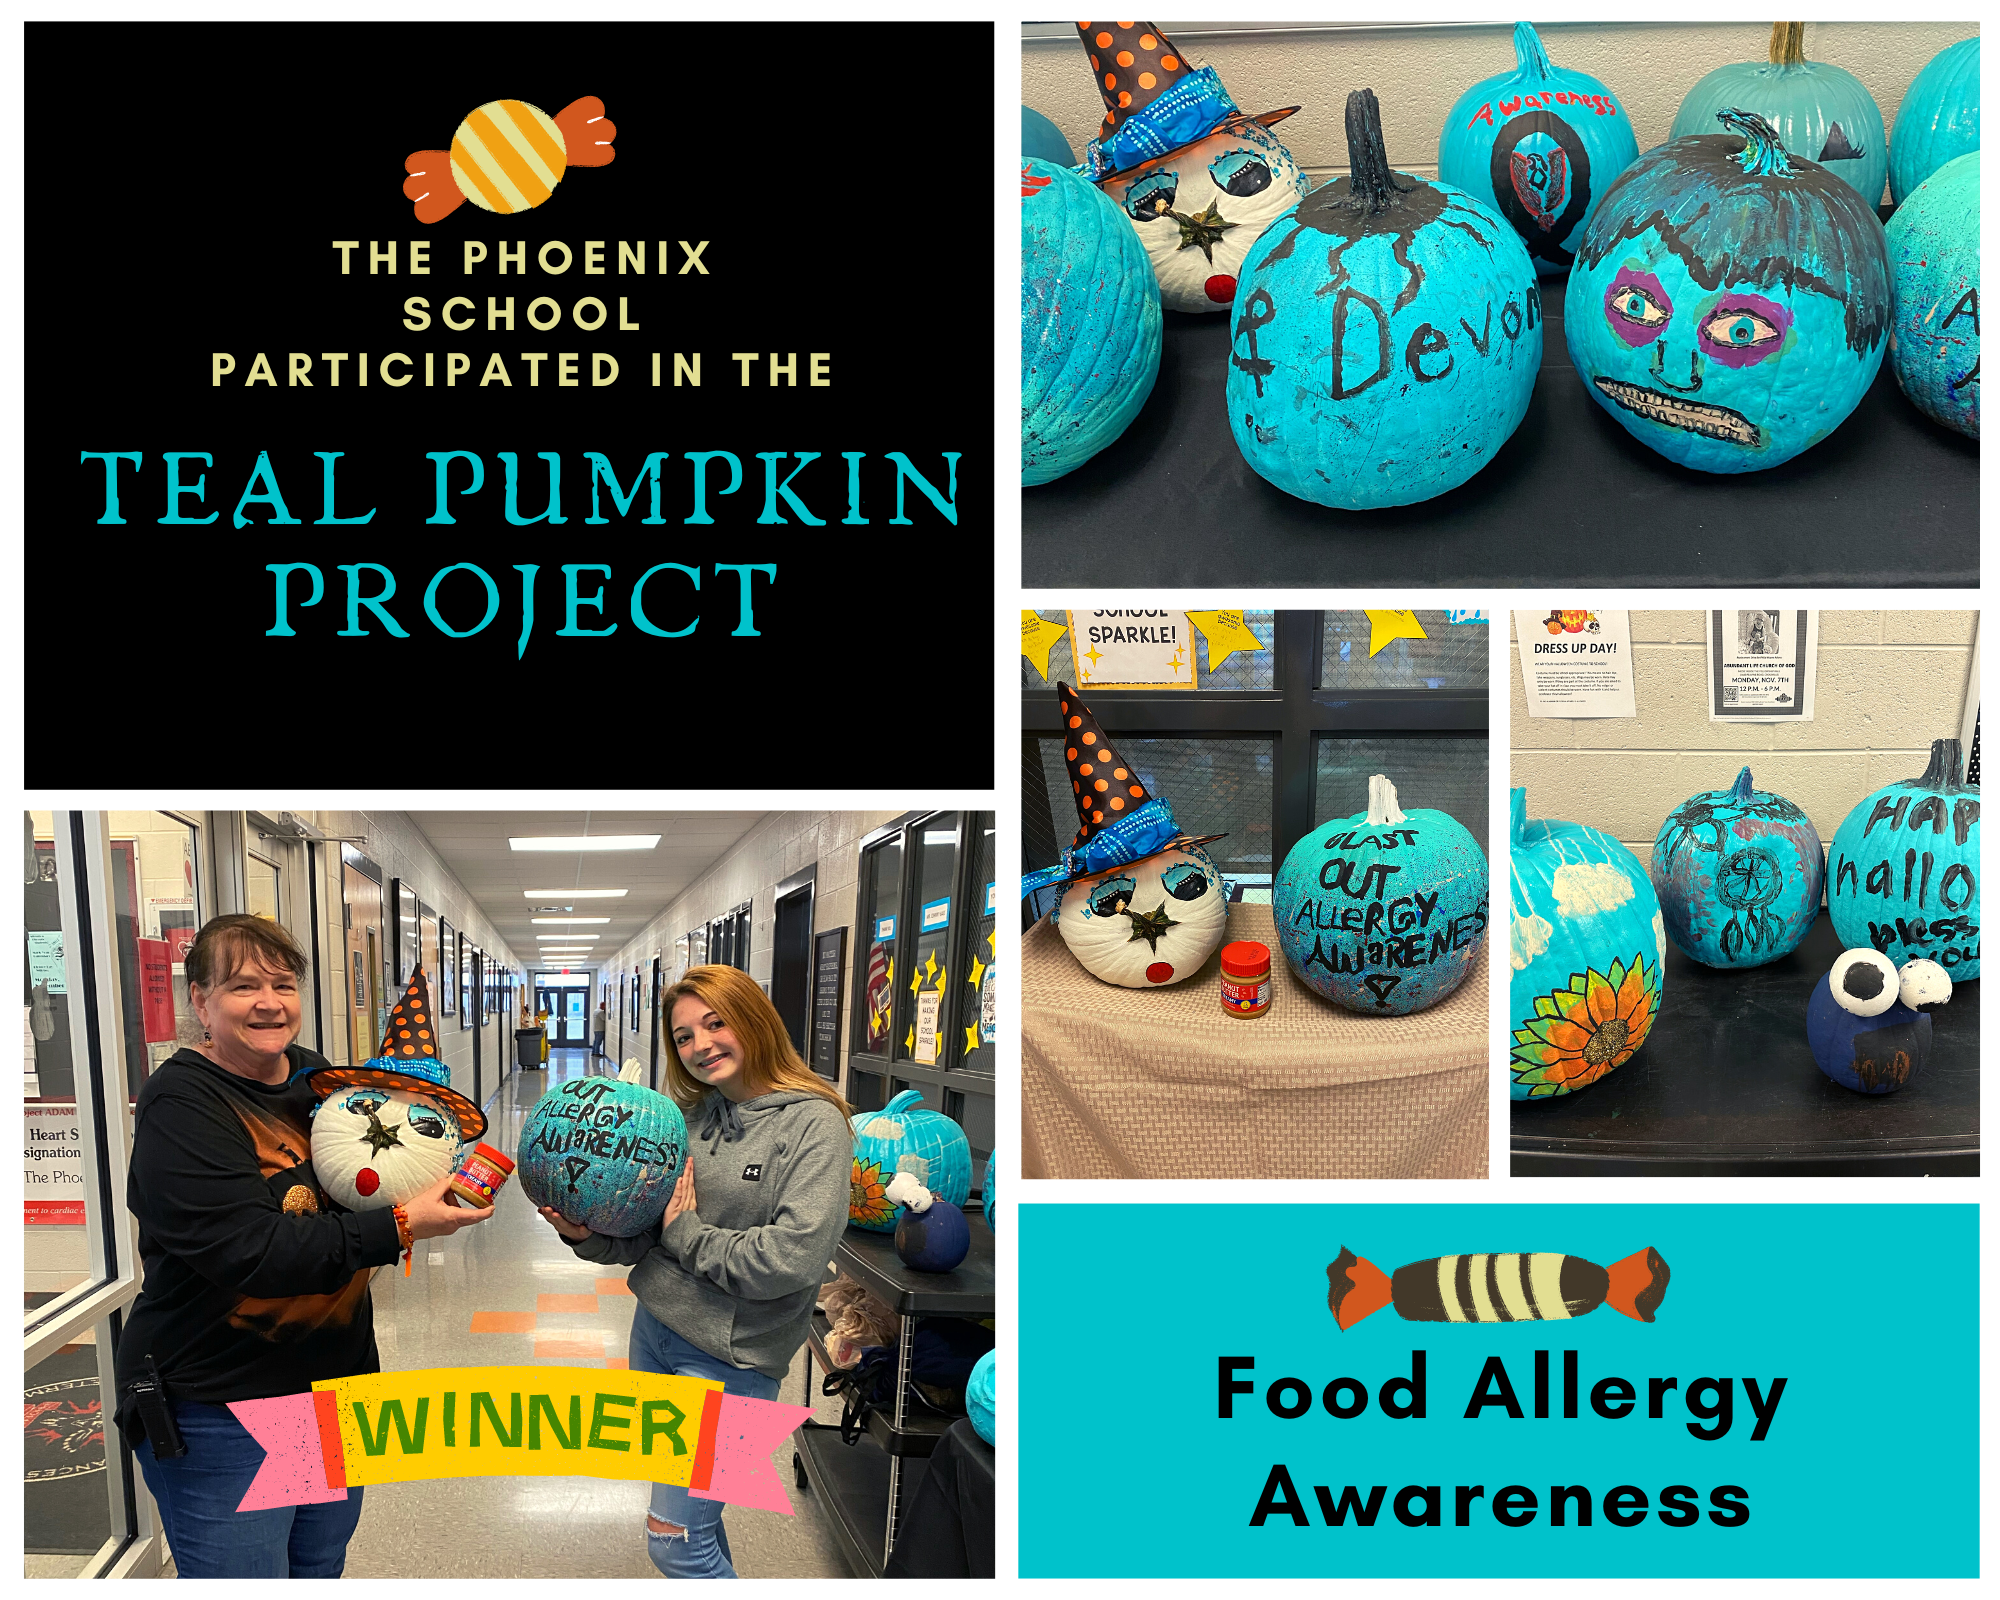 This is a picture of the teal pumpkins that students painted.